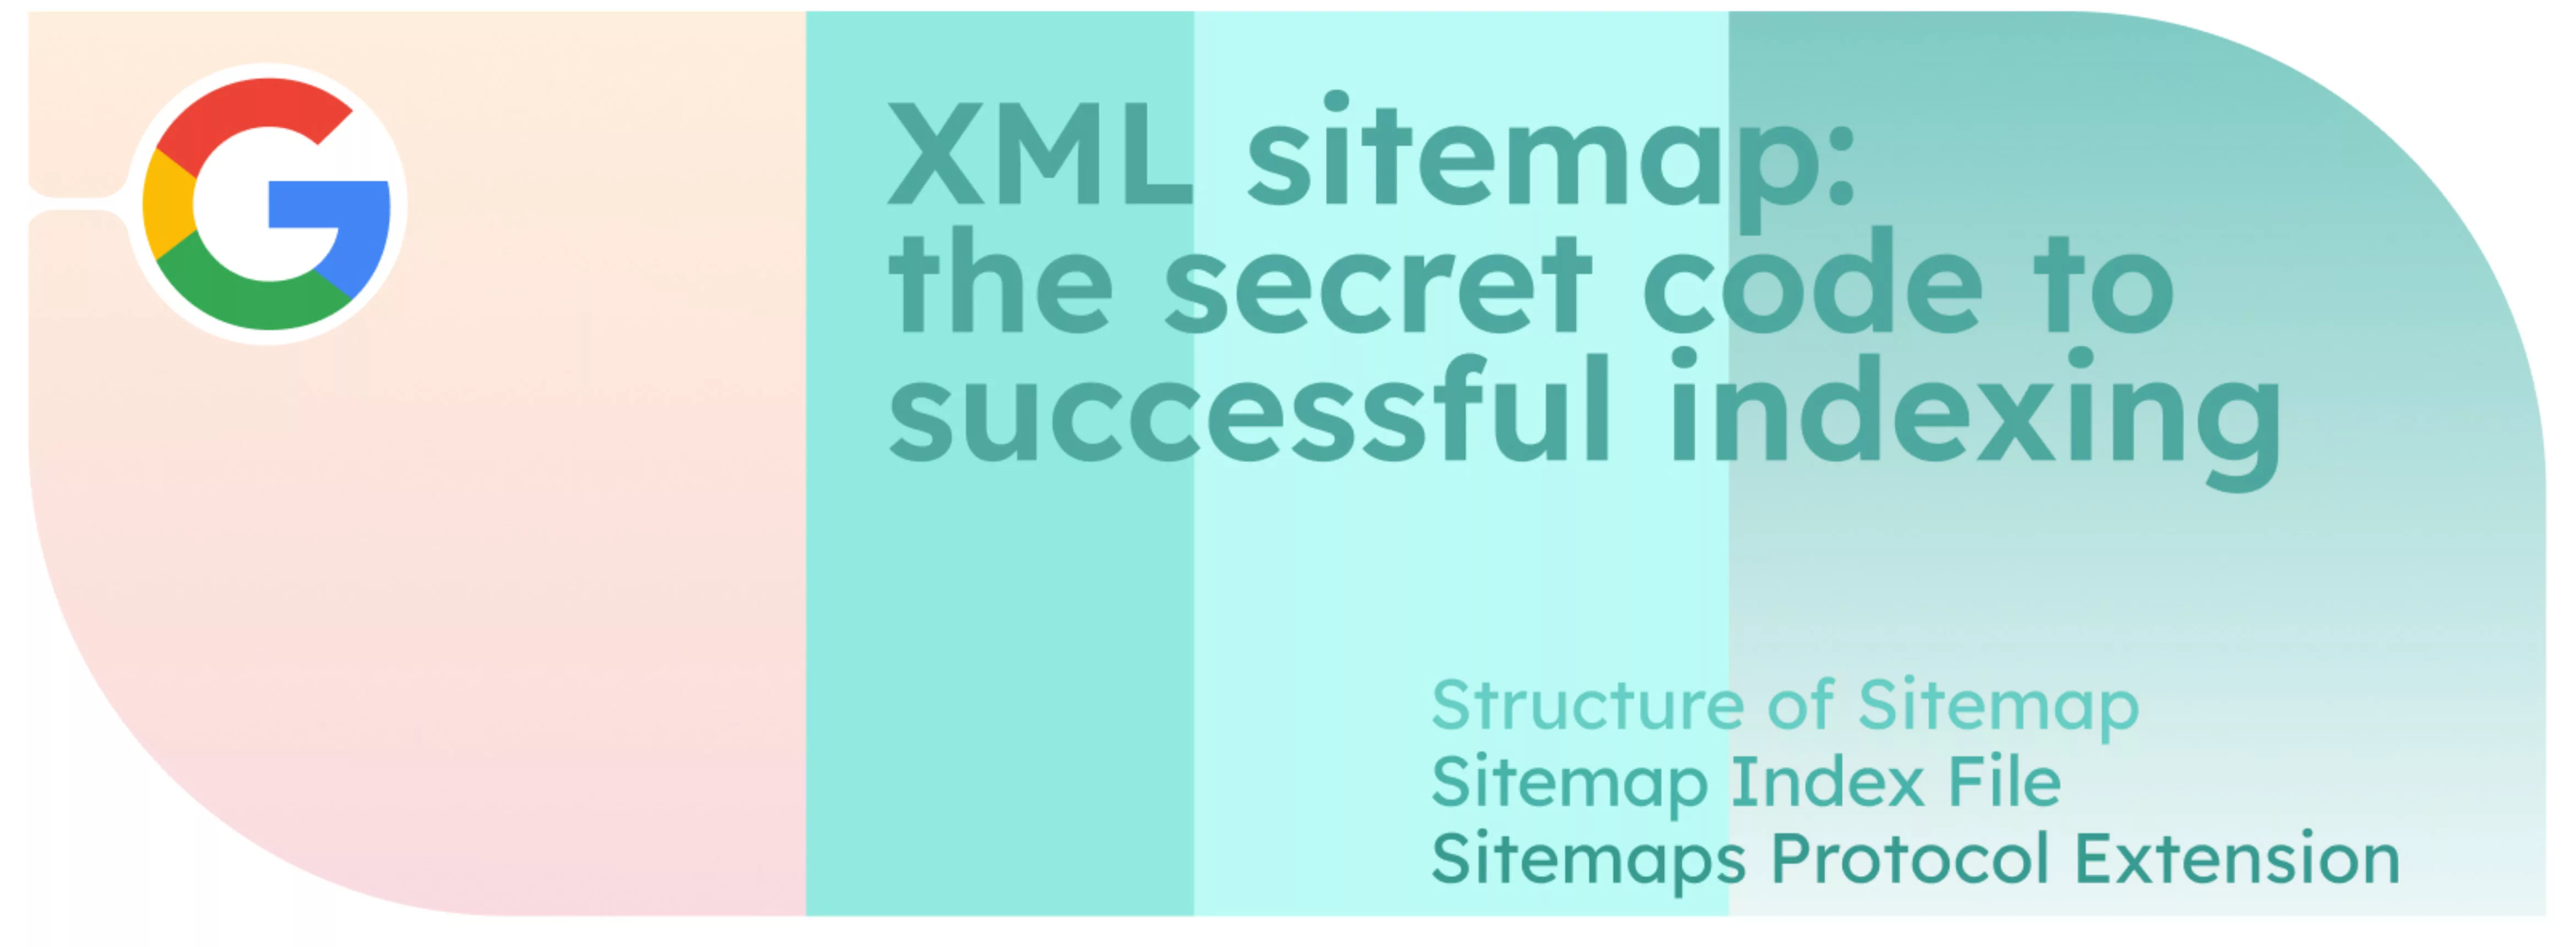 XML sitemap: the secret code to successful indexing